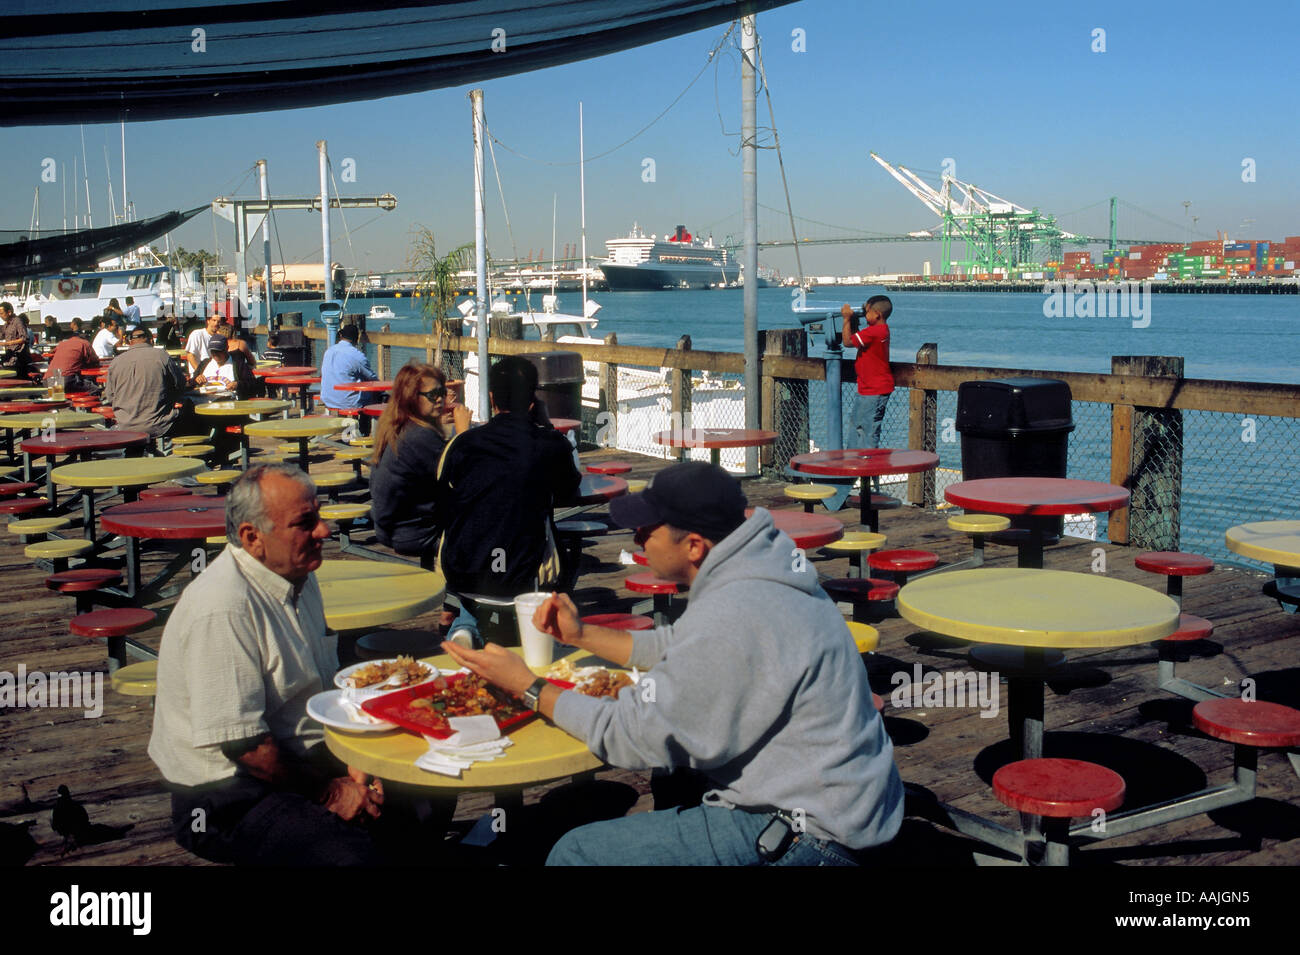 One of many seafood restaurants along the main channel in San Pedro Harbor Stock Photo